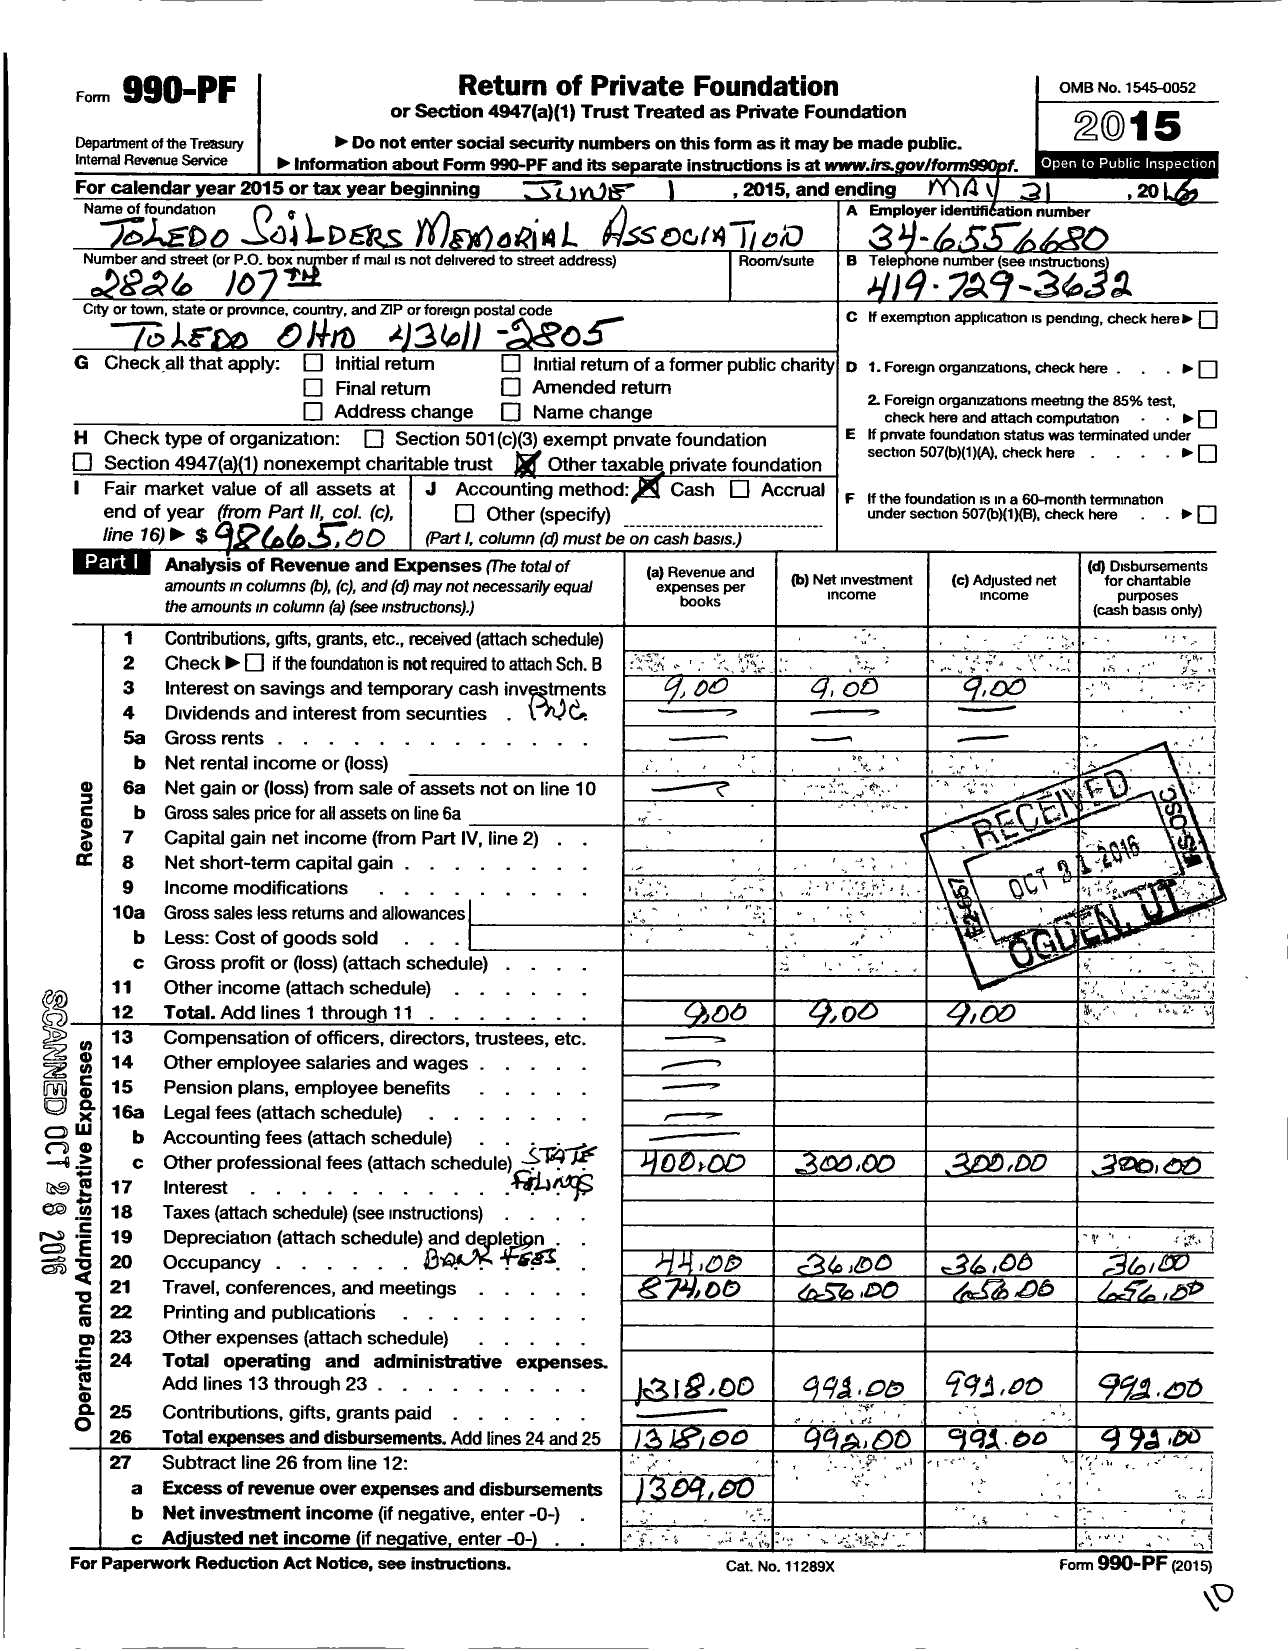 Image of first page of 2015 Form 990PF for Toledo Soilders Memorial Association